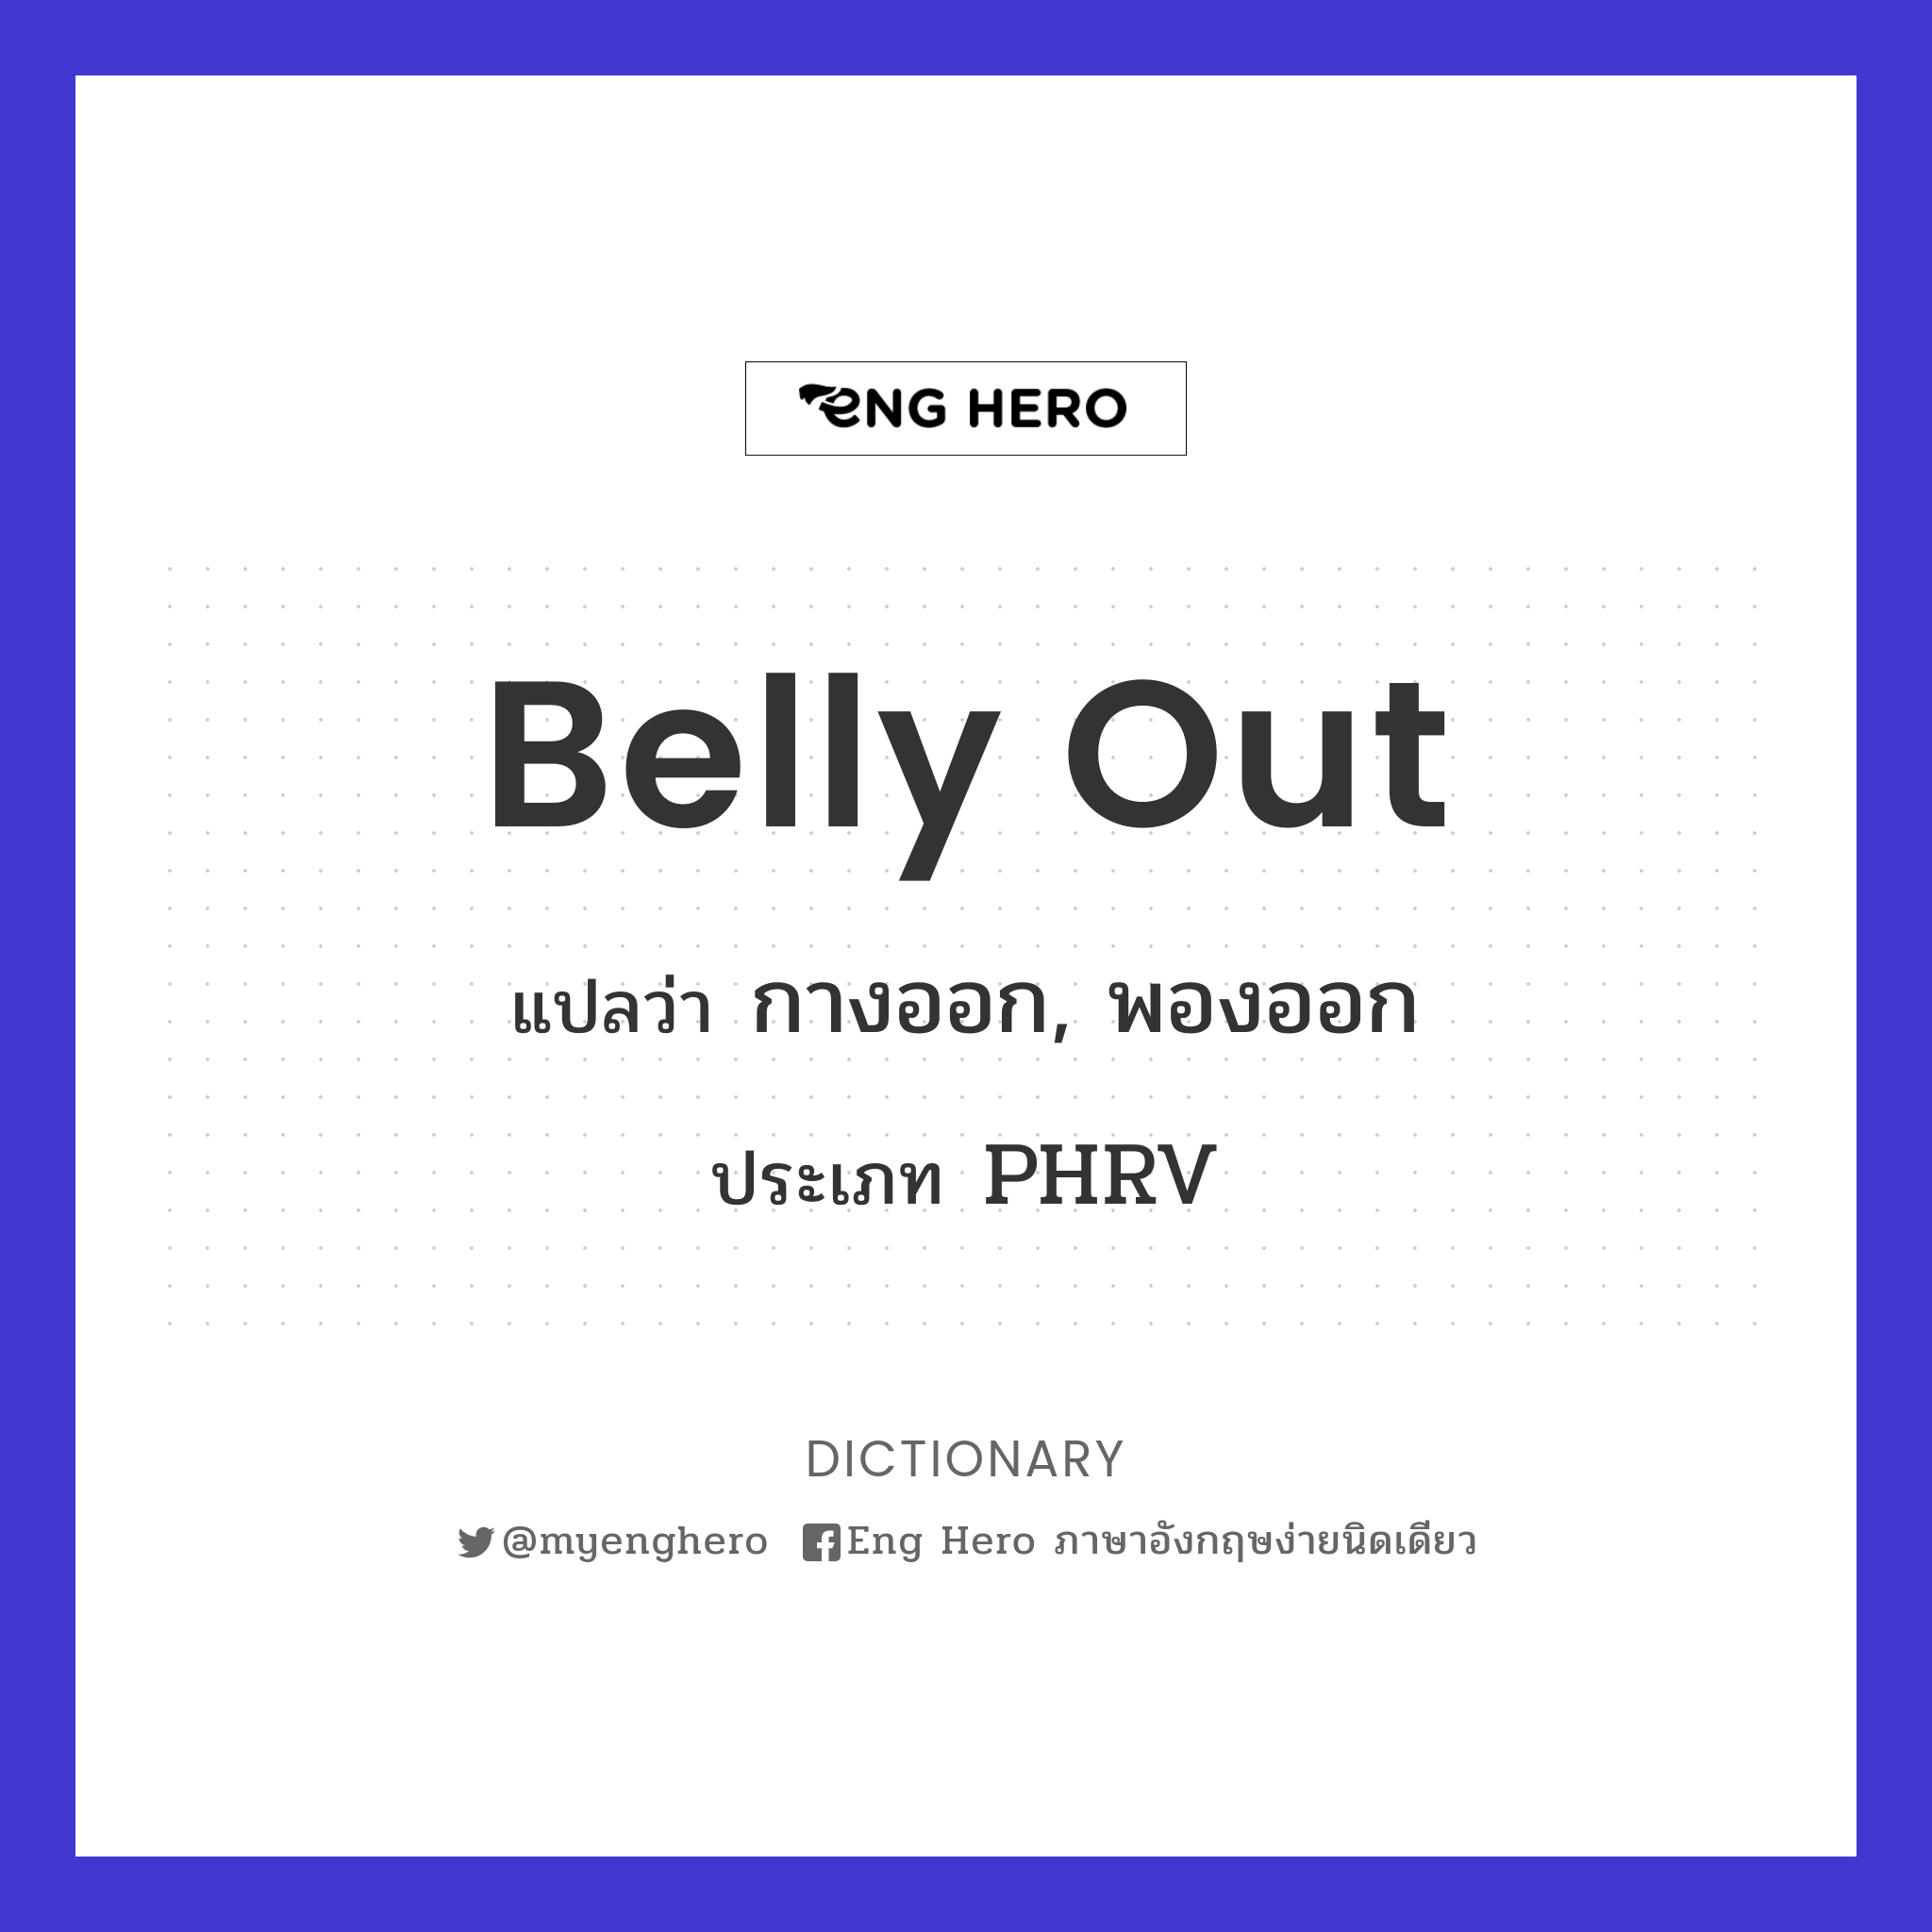 belly out